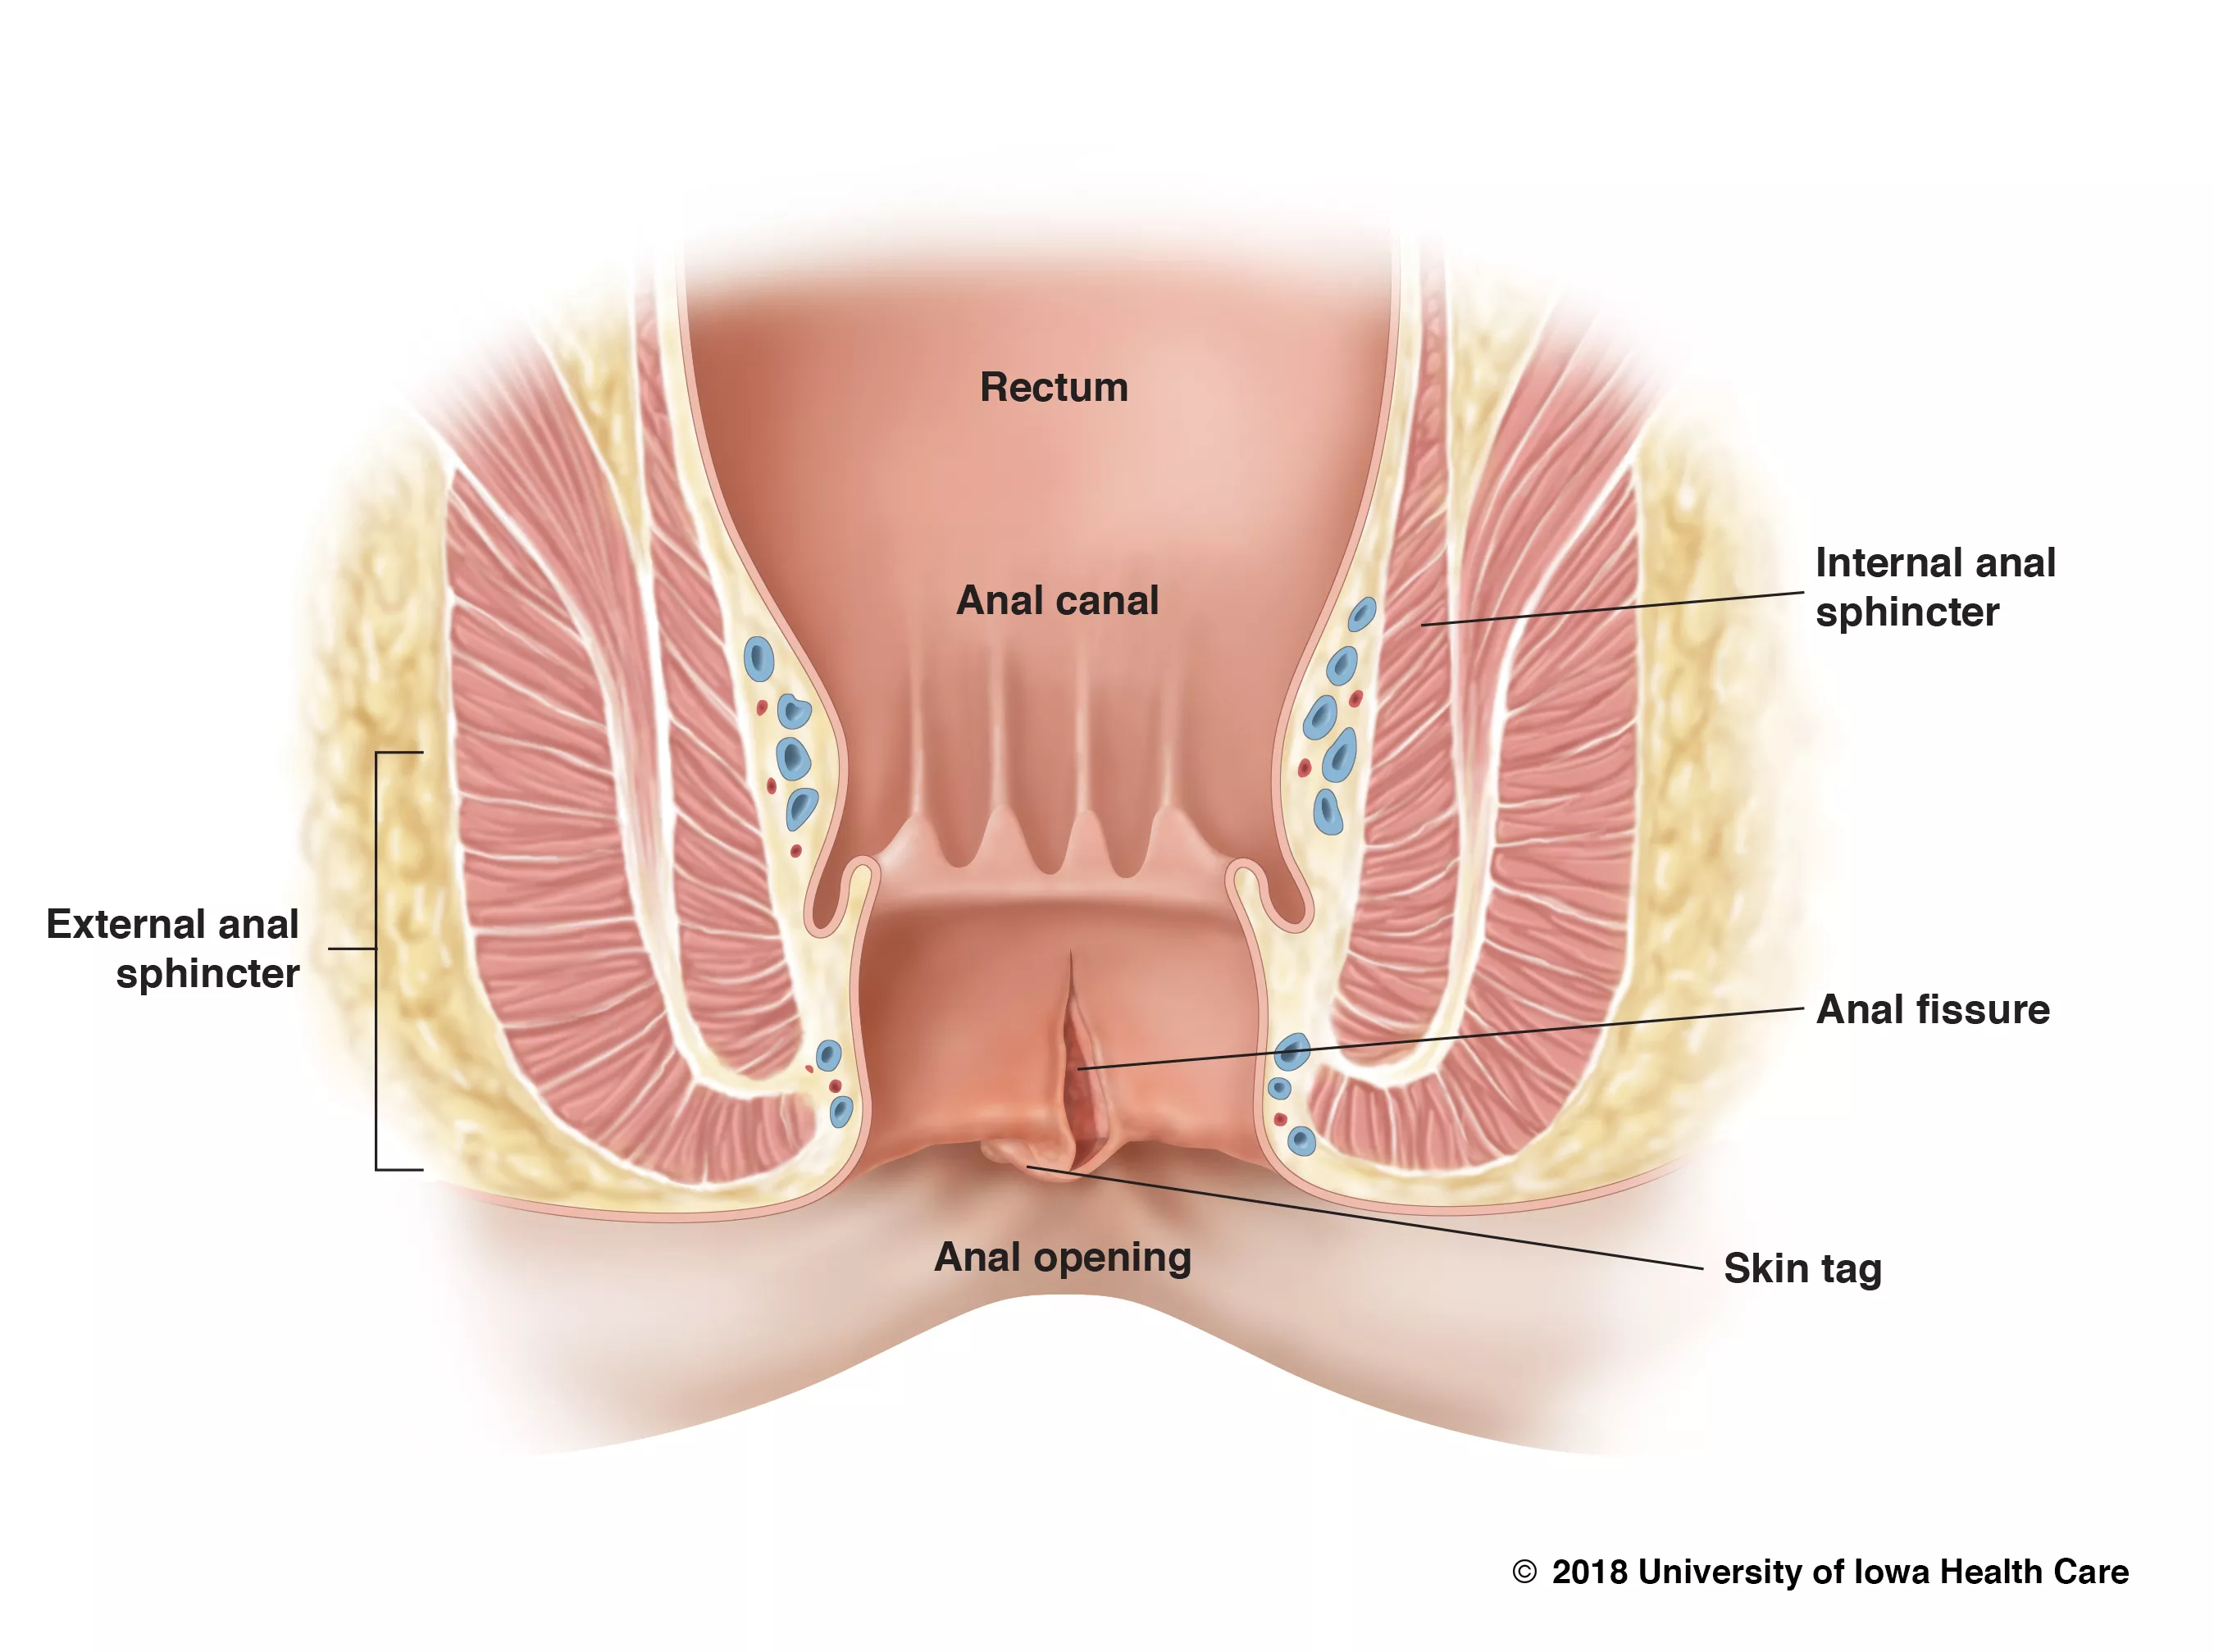 Illustration of an anal fissure